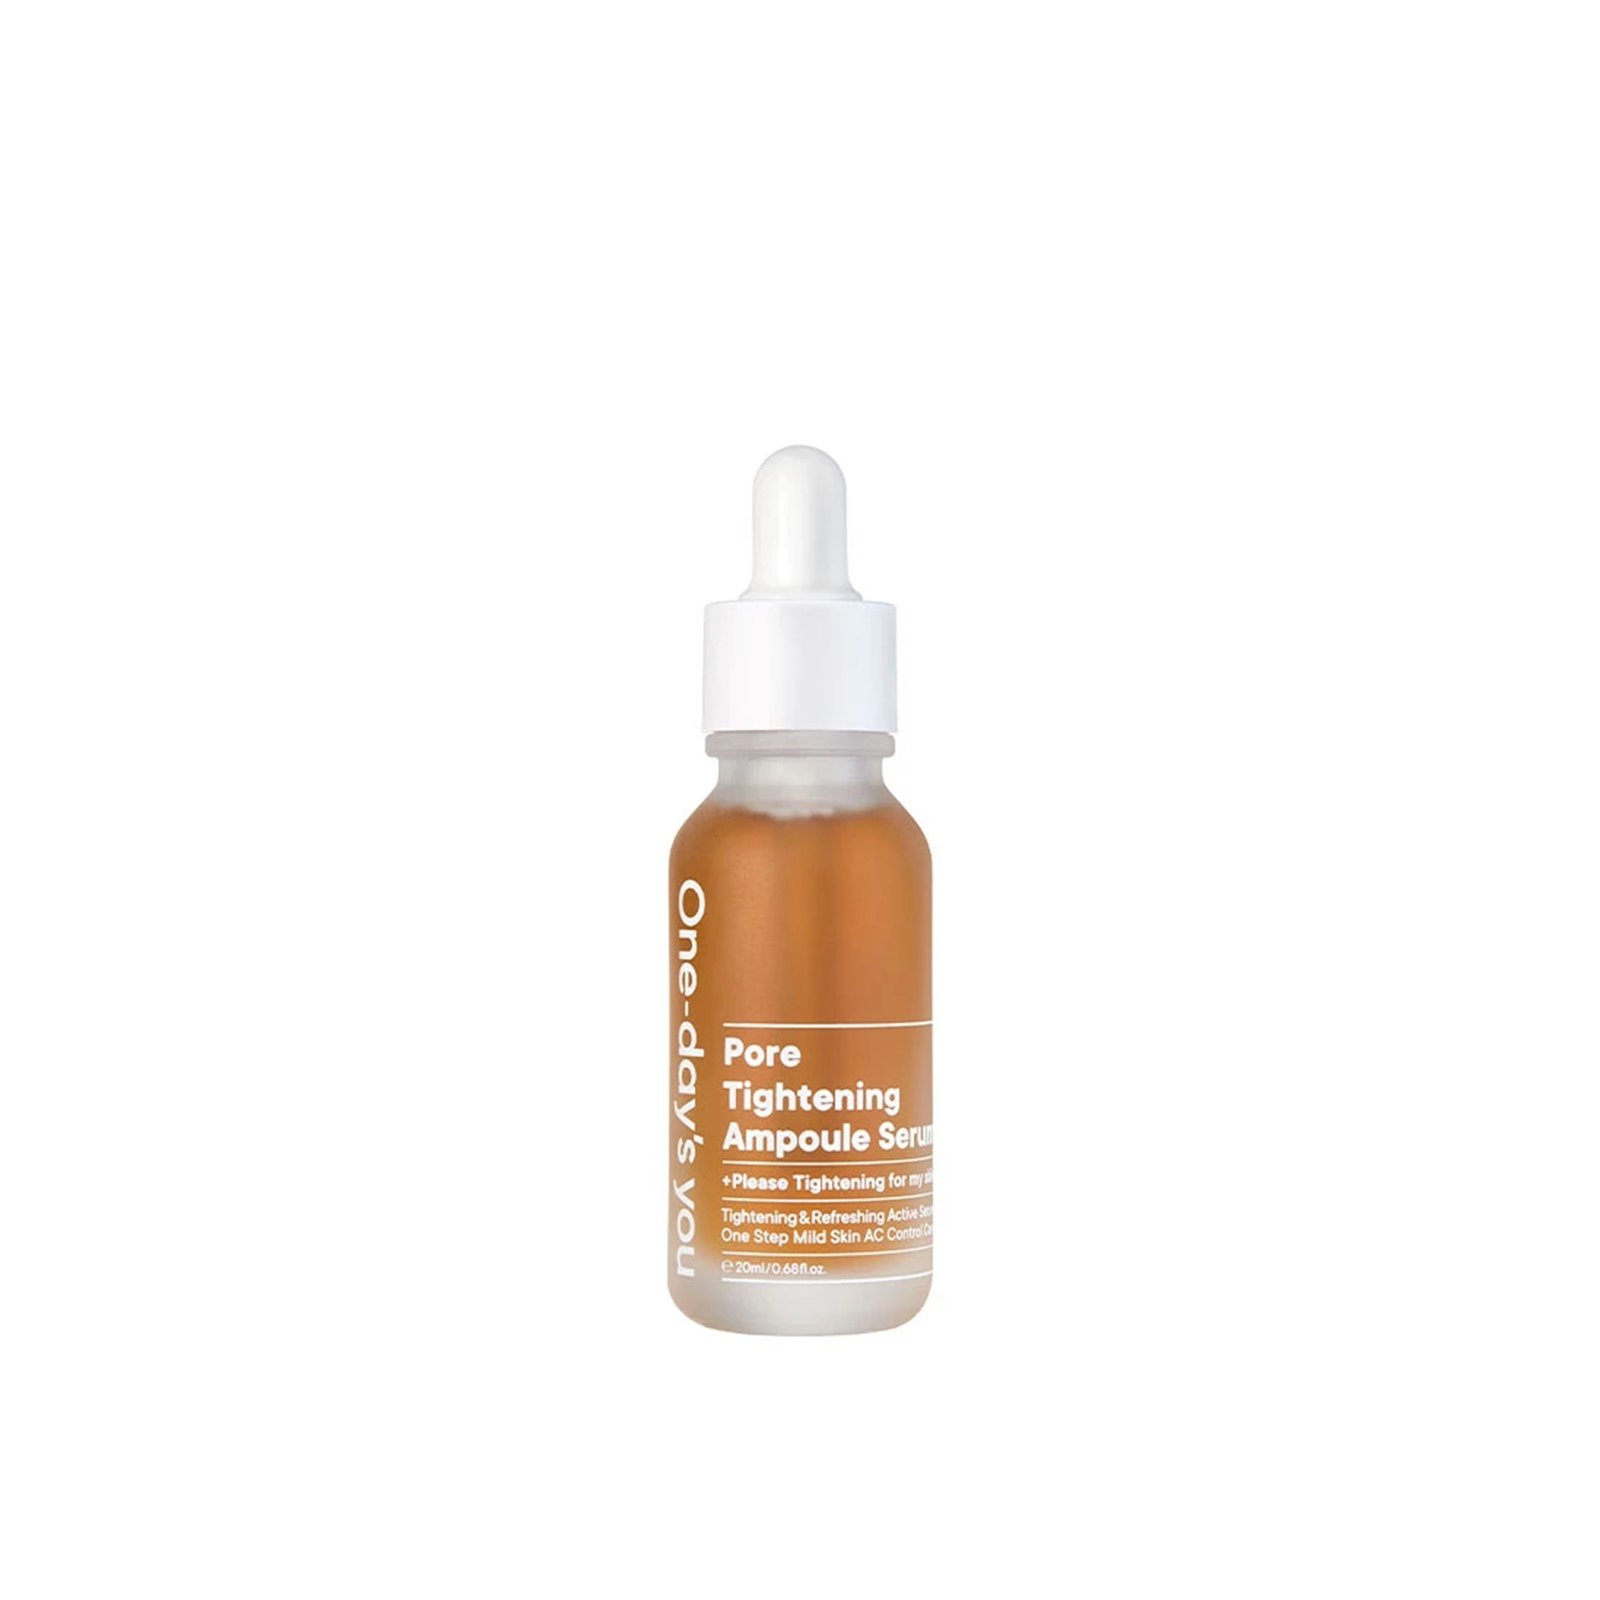 One-day's you Pore Tightening Ampoule Serum 30ml